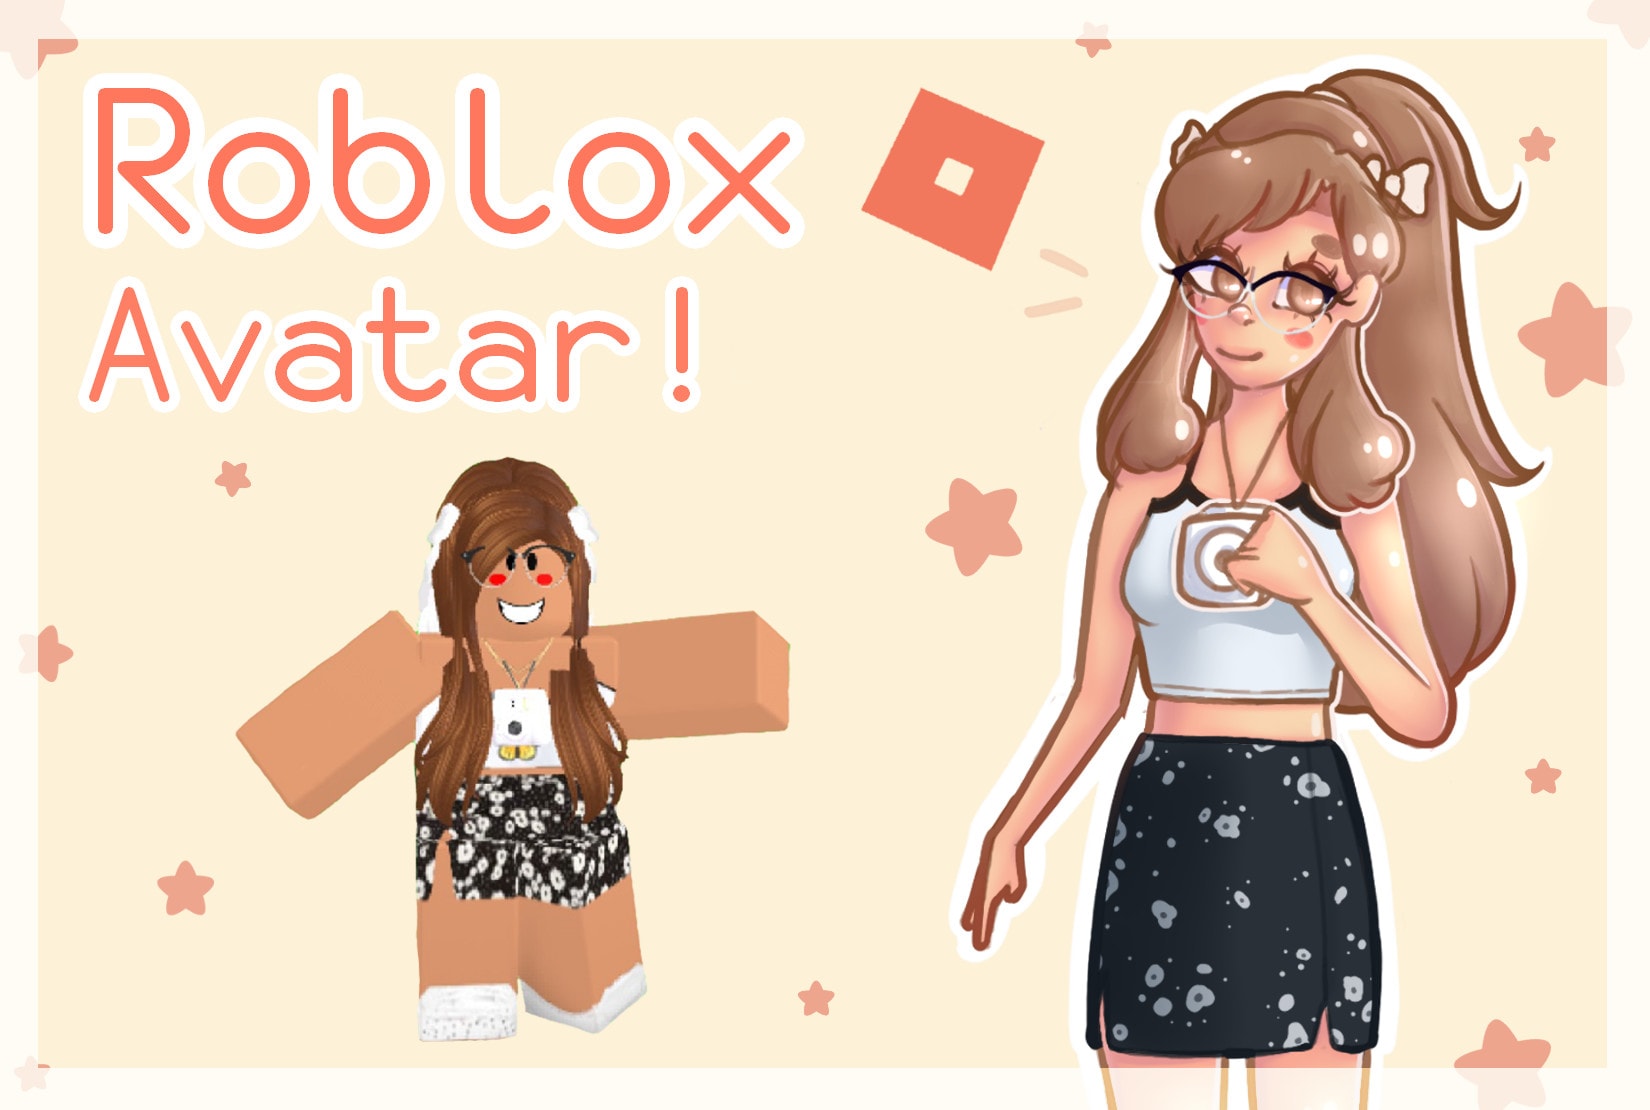 Draw Your Roblox Or Minecraft Avatar In A Cutesy Style By Scribbly Peach - draw your roblox minecraft or video game avatar by lilyputiann